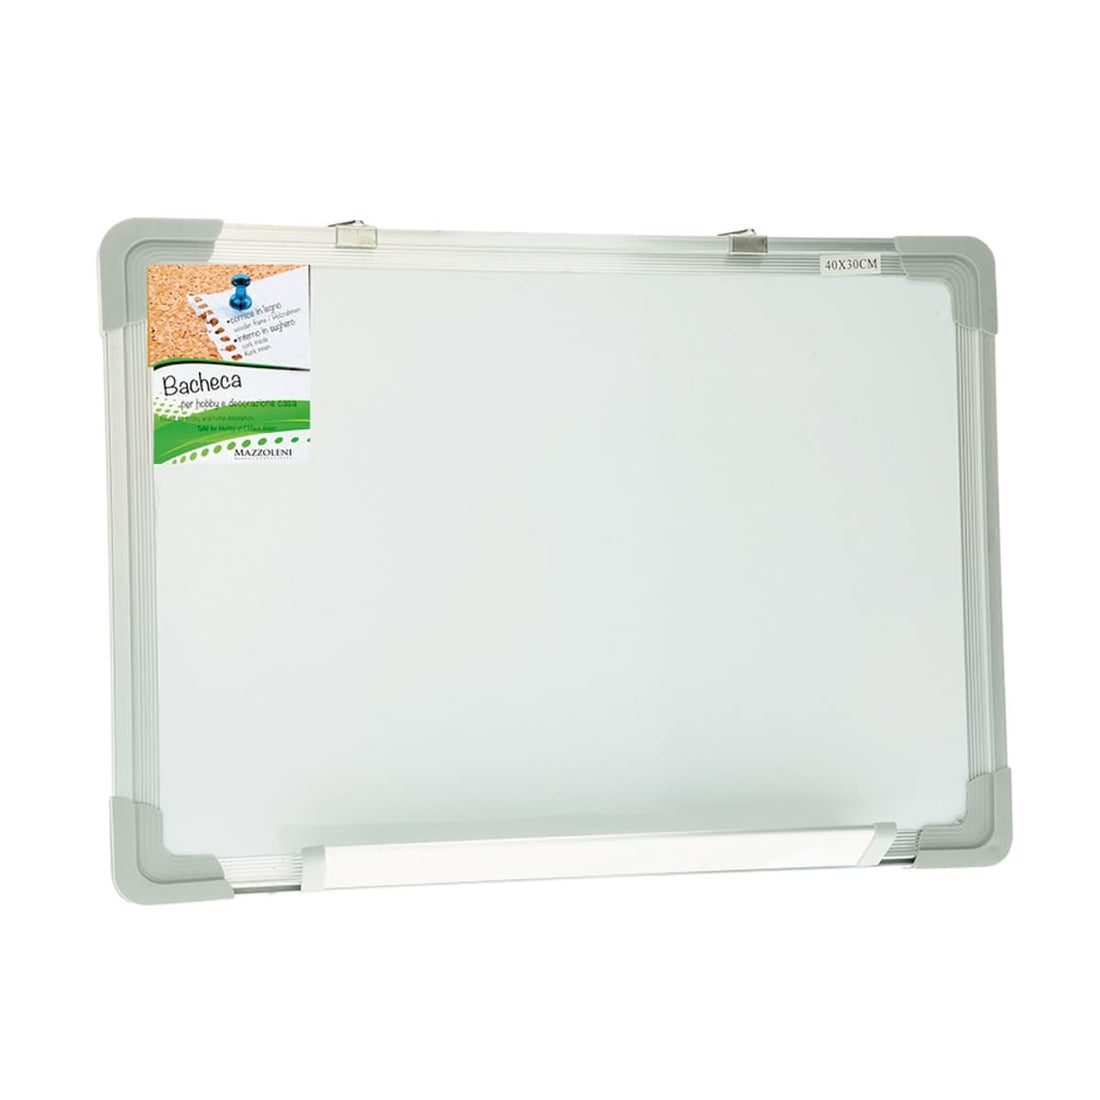 60X90 CM MAGNETIC BOARD WITH METAL FRAME - best price from Maltashopper.com BR480003989